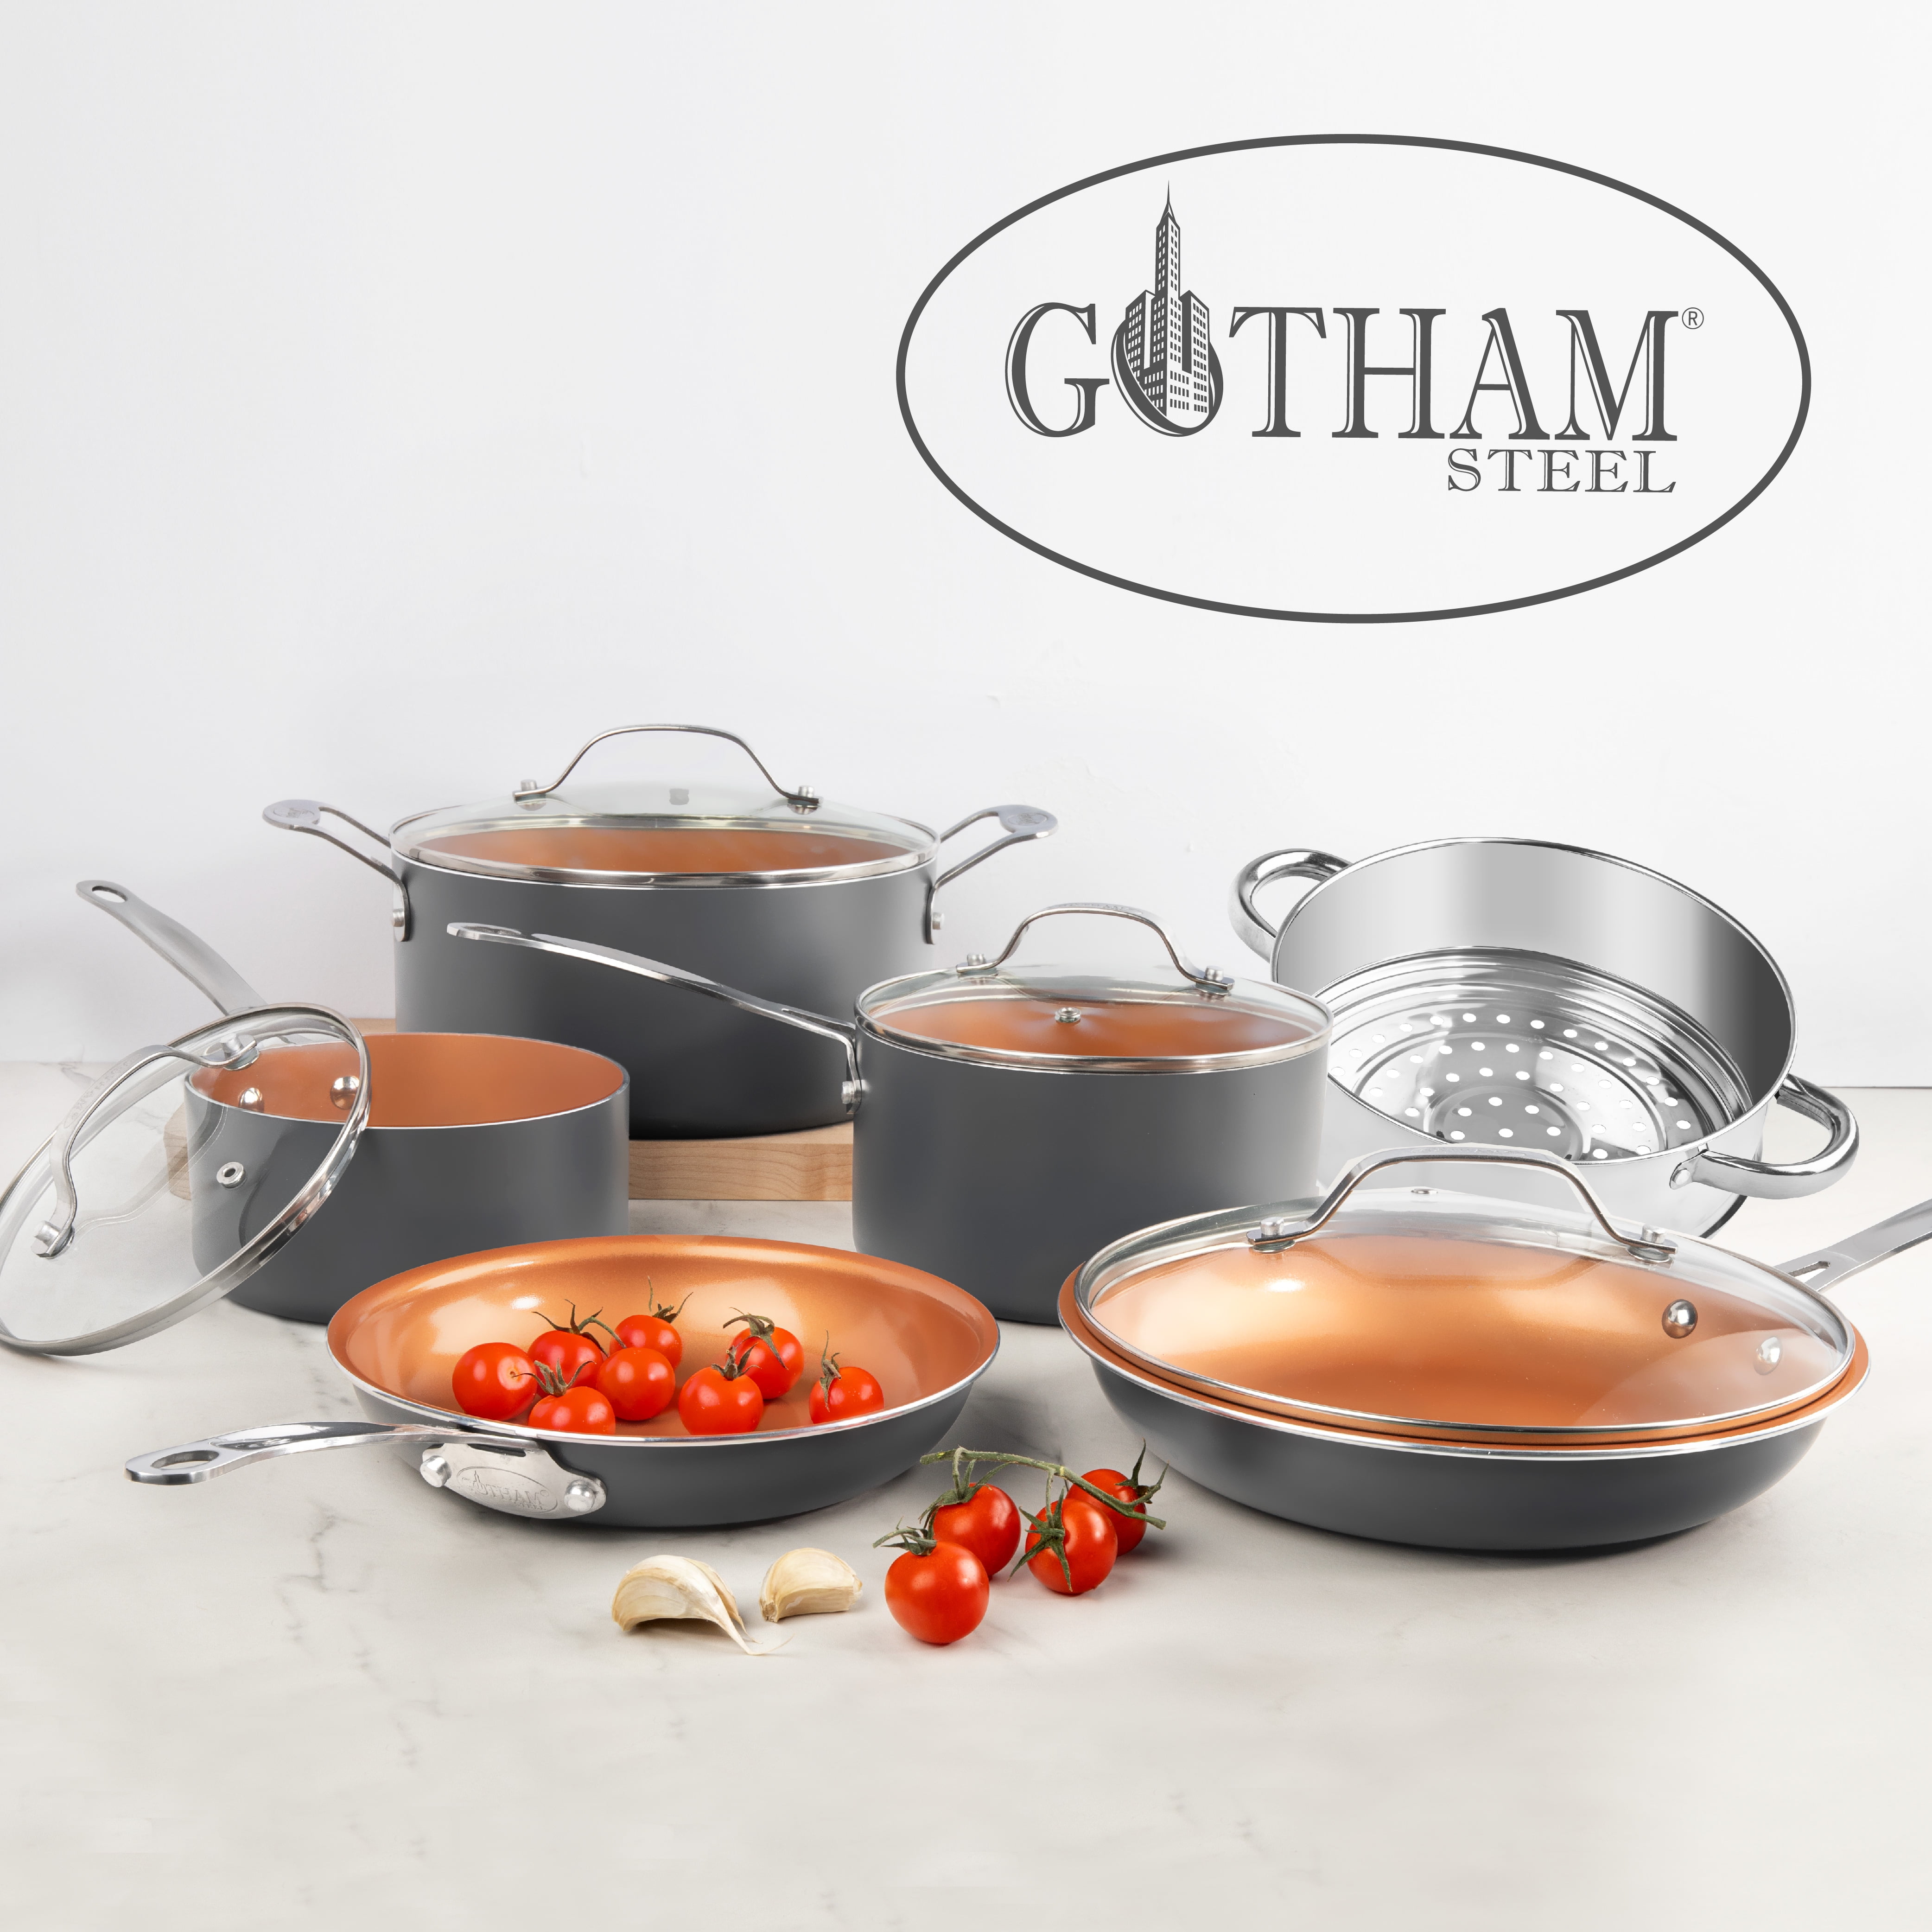  Gotham Steel Hammered 15 Piece Pots and Pans Set Non Stick Cookware  Set, Pot and Pan Set, Kitchen Cookware Sets, Non Toxic Ceramic Cookware Set,  Induction Cookware, Dishwasher Safe, Cream White 